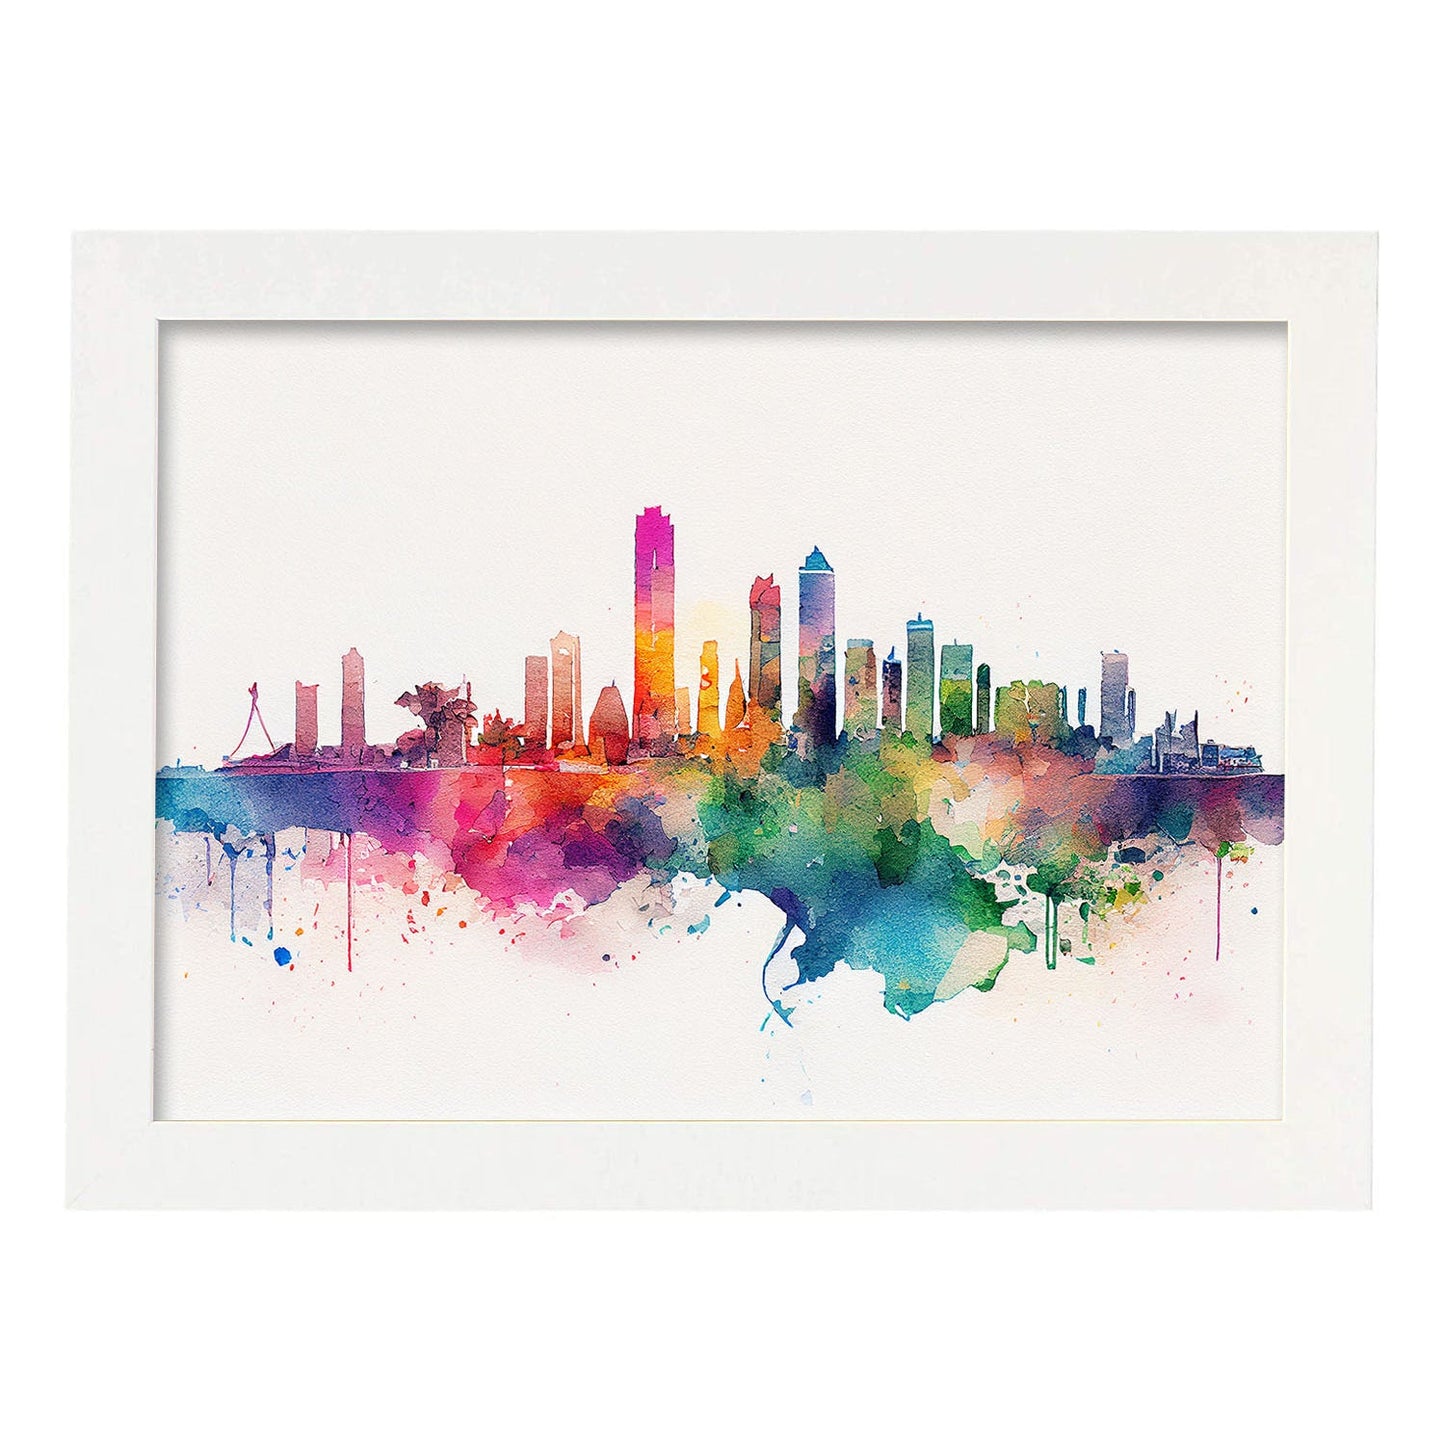 Nacnic watercolor of a skyline of the city of Tel Aviv_1. Aesthetic Wall Art Prints for Bedroom or Living Room Design.-Artwork-Nacnic-A4-Marco Blanco-Nacnic Estudio SL